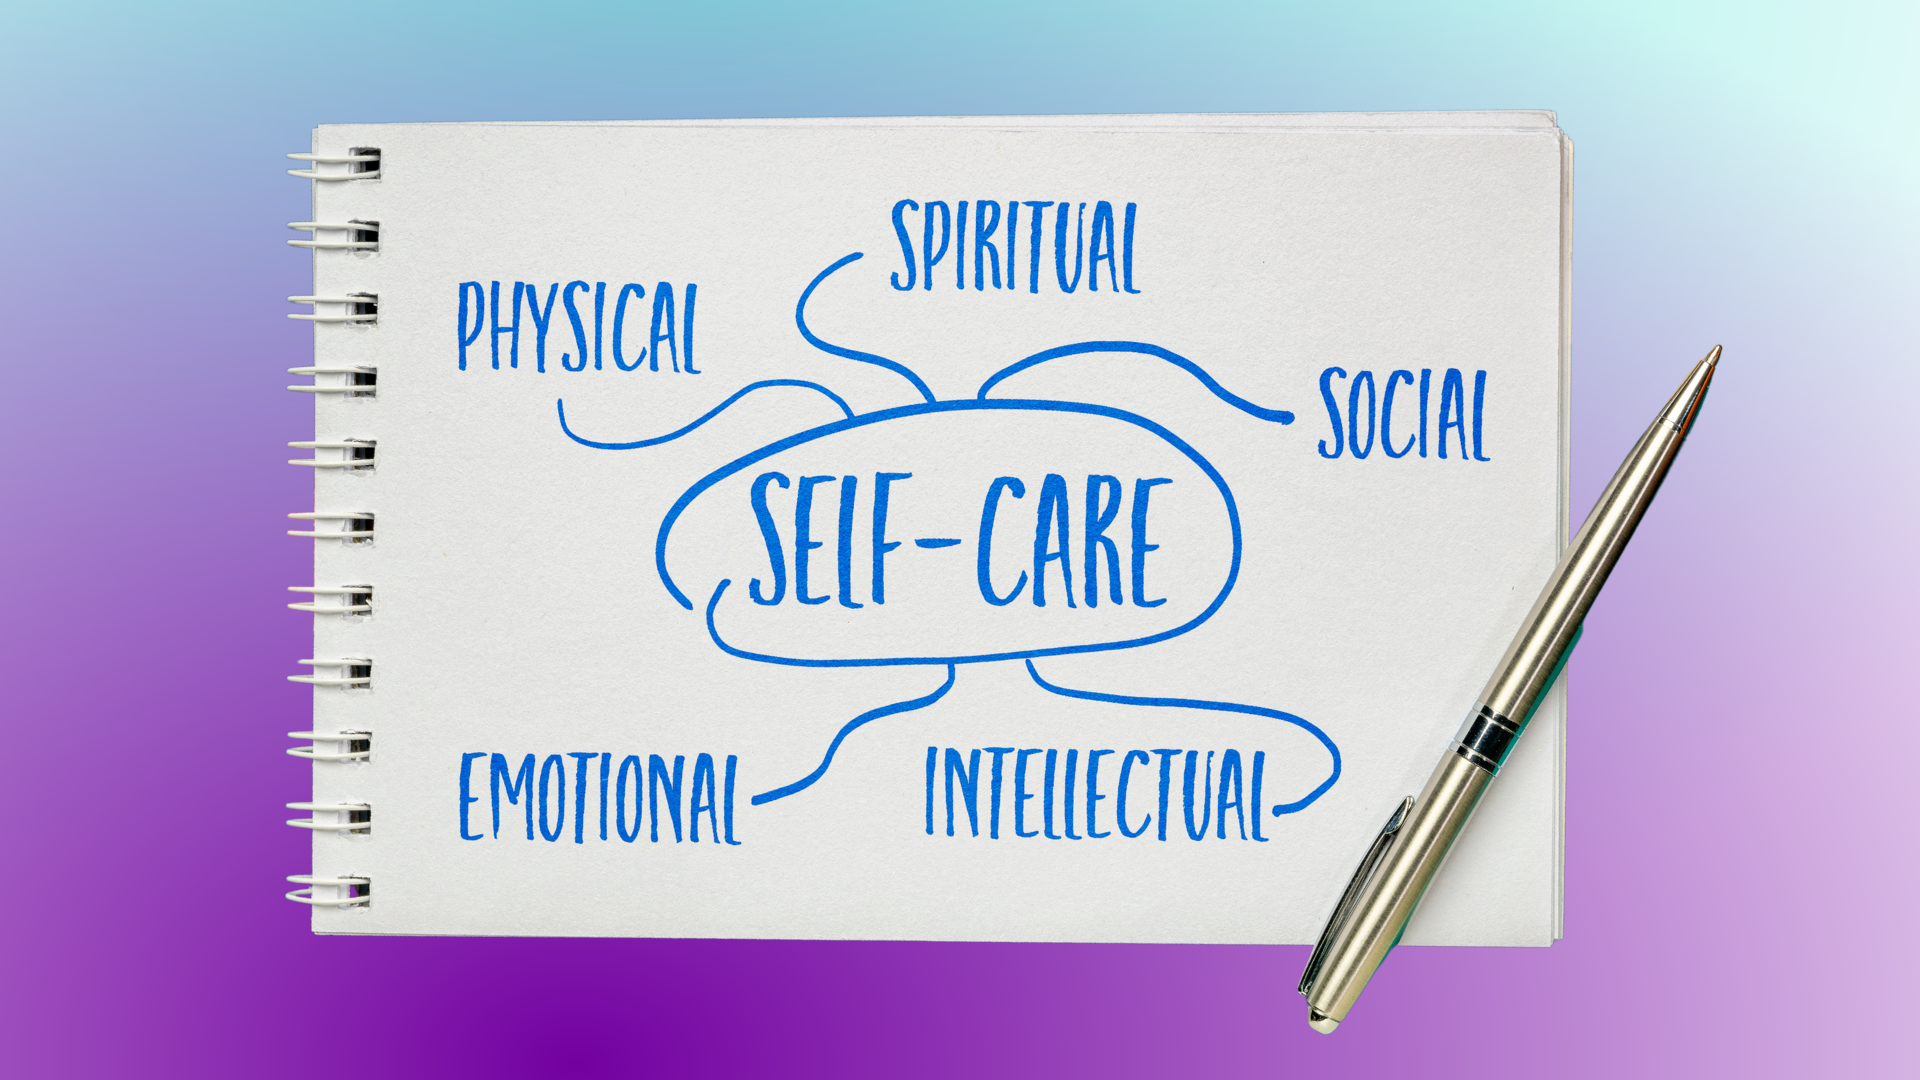 Self-care is when you actively protect your well-being and happiness, particularly during stressful periods. 